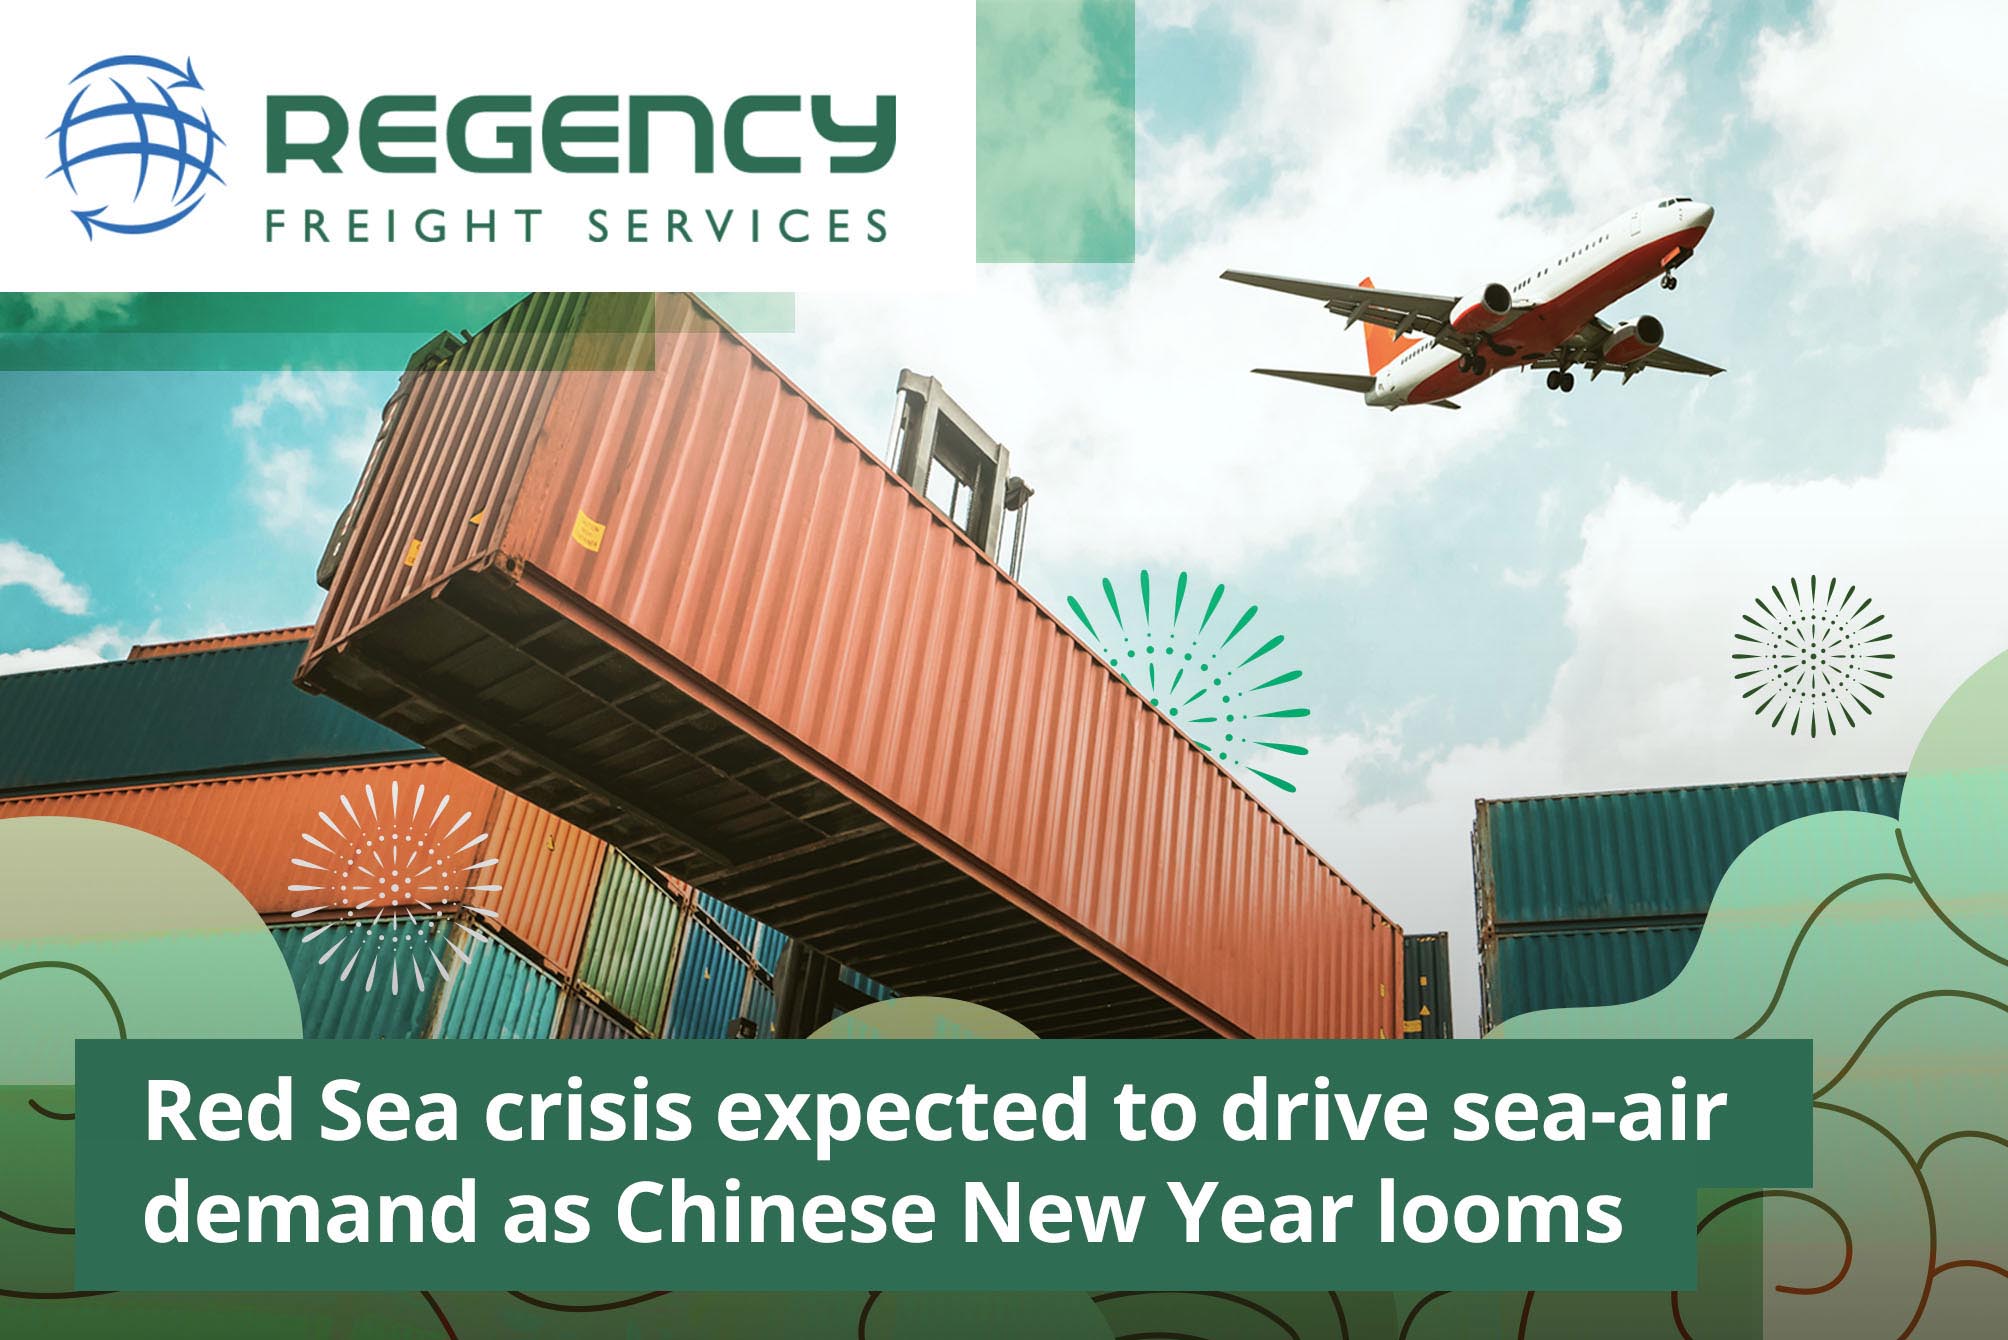 Red Sea crisis expected to drive sea-air demand as Chinese New Year looms